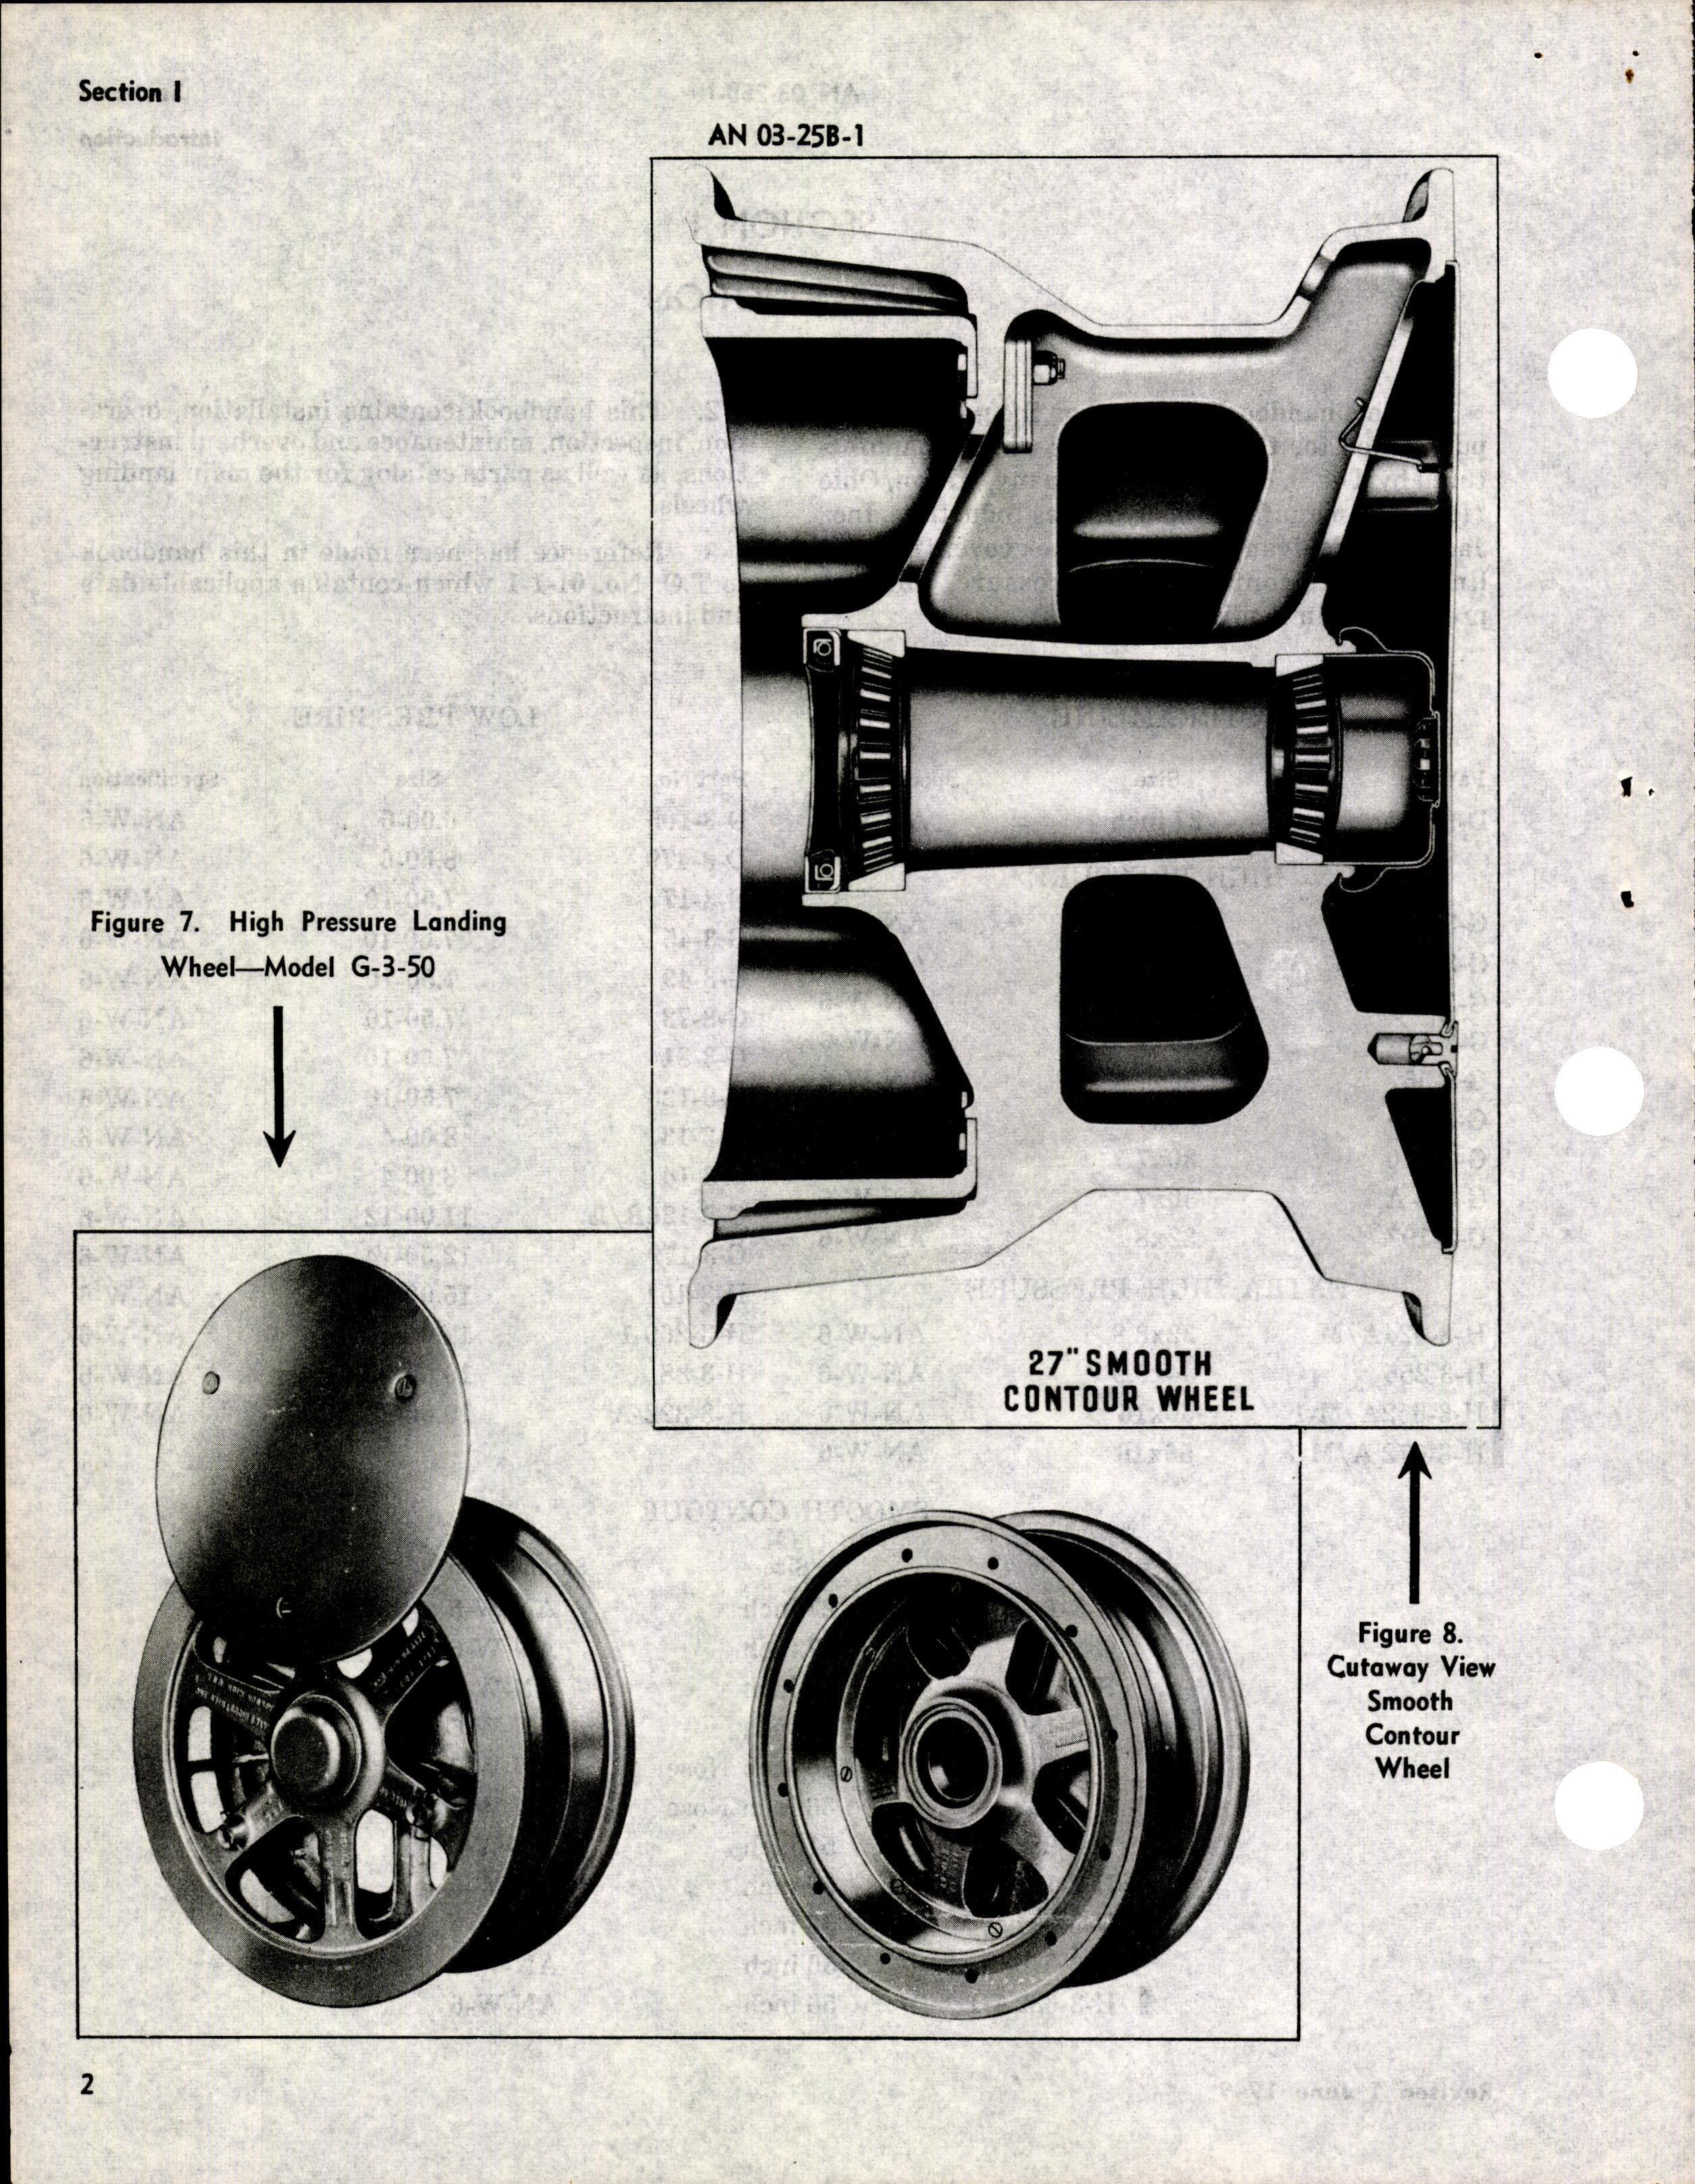 Sample page 4 from AirCorps Library document: Operation, Service, & Overhaul Instructions with Parts Catalog for Main Landing Wheels